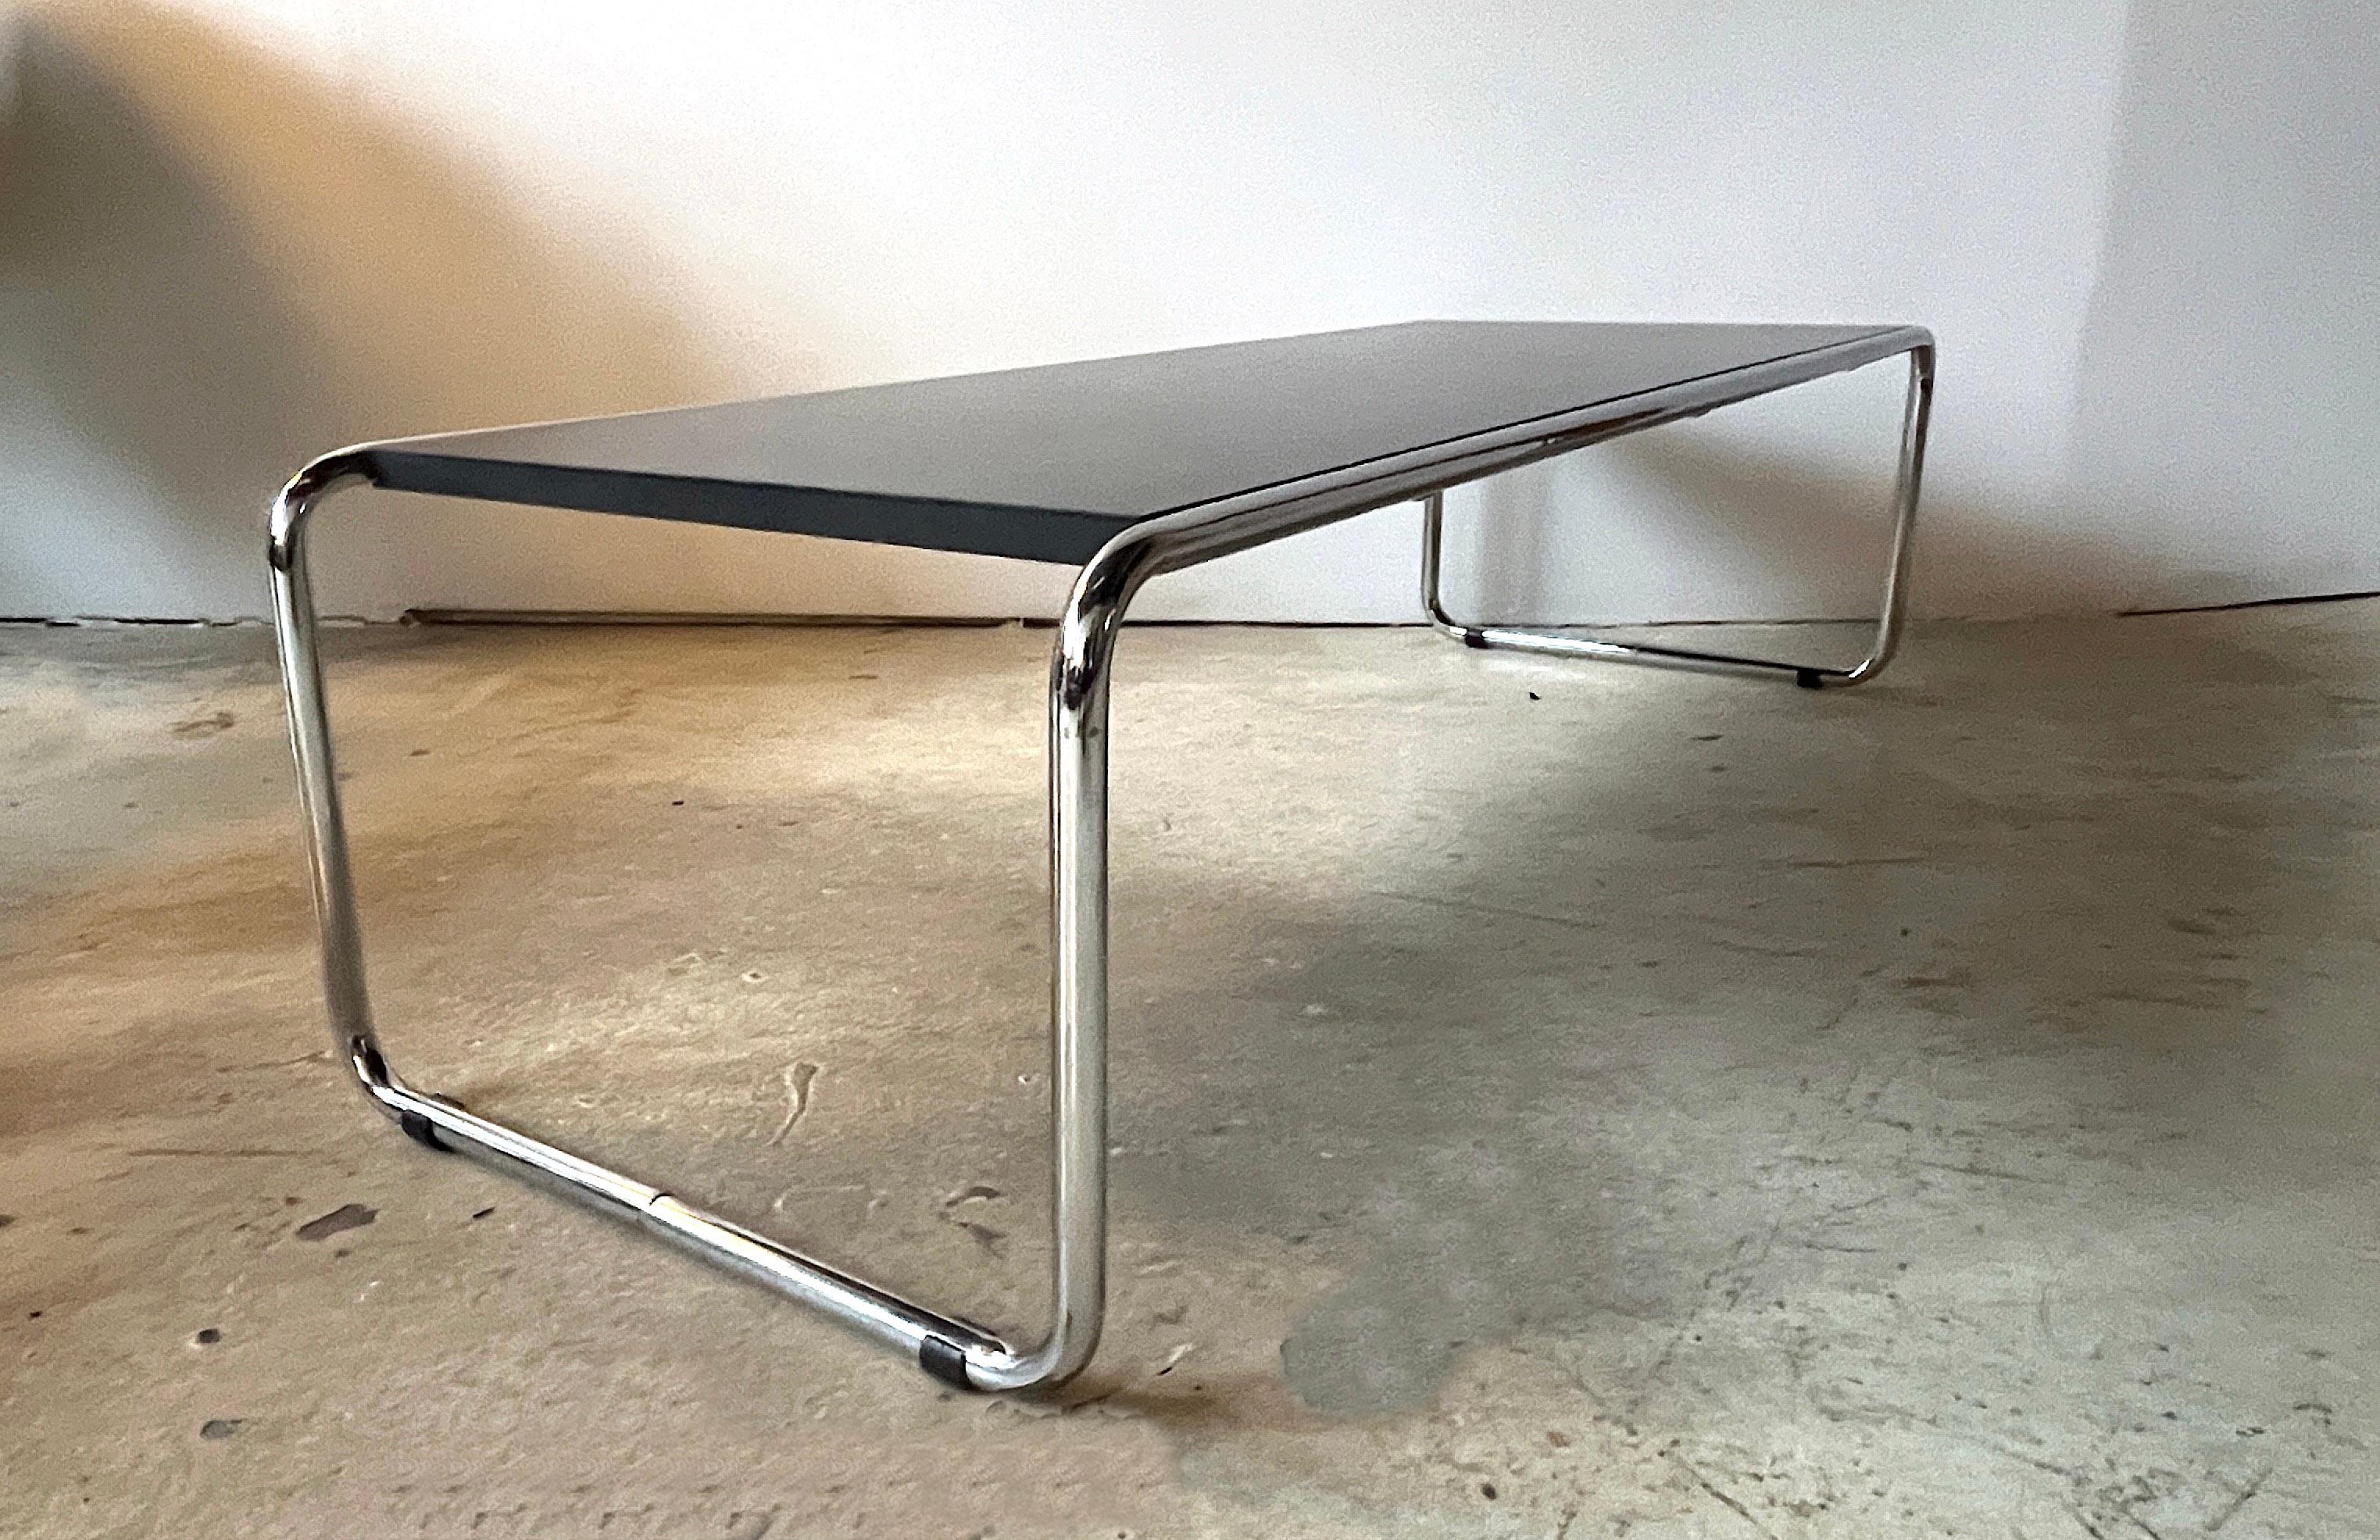 Reproduction of American International-Style (circa 1924) 'Laccio' coffee table with a black rectangular top supported on a chrome plated steel tube frame. Attributed to Marcel Breuer for Knoll, however there are no makers marks. 

Measures 52